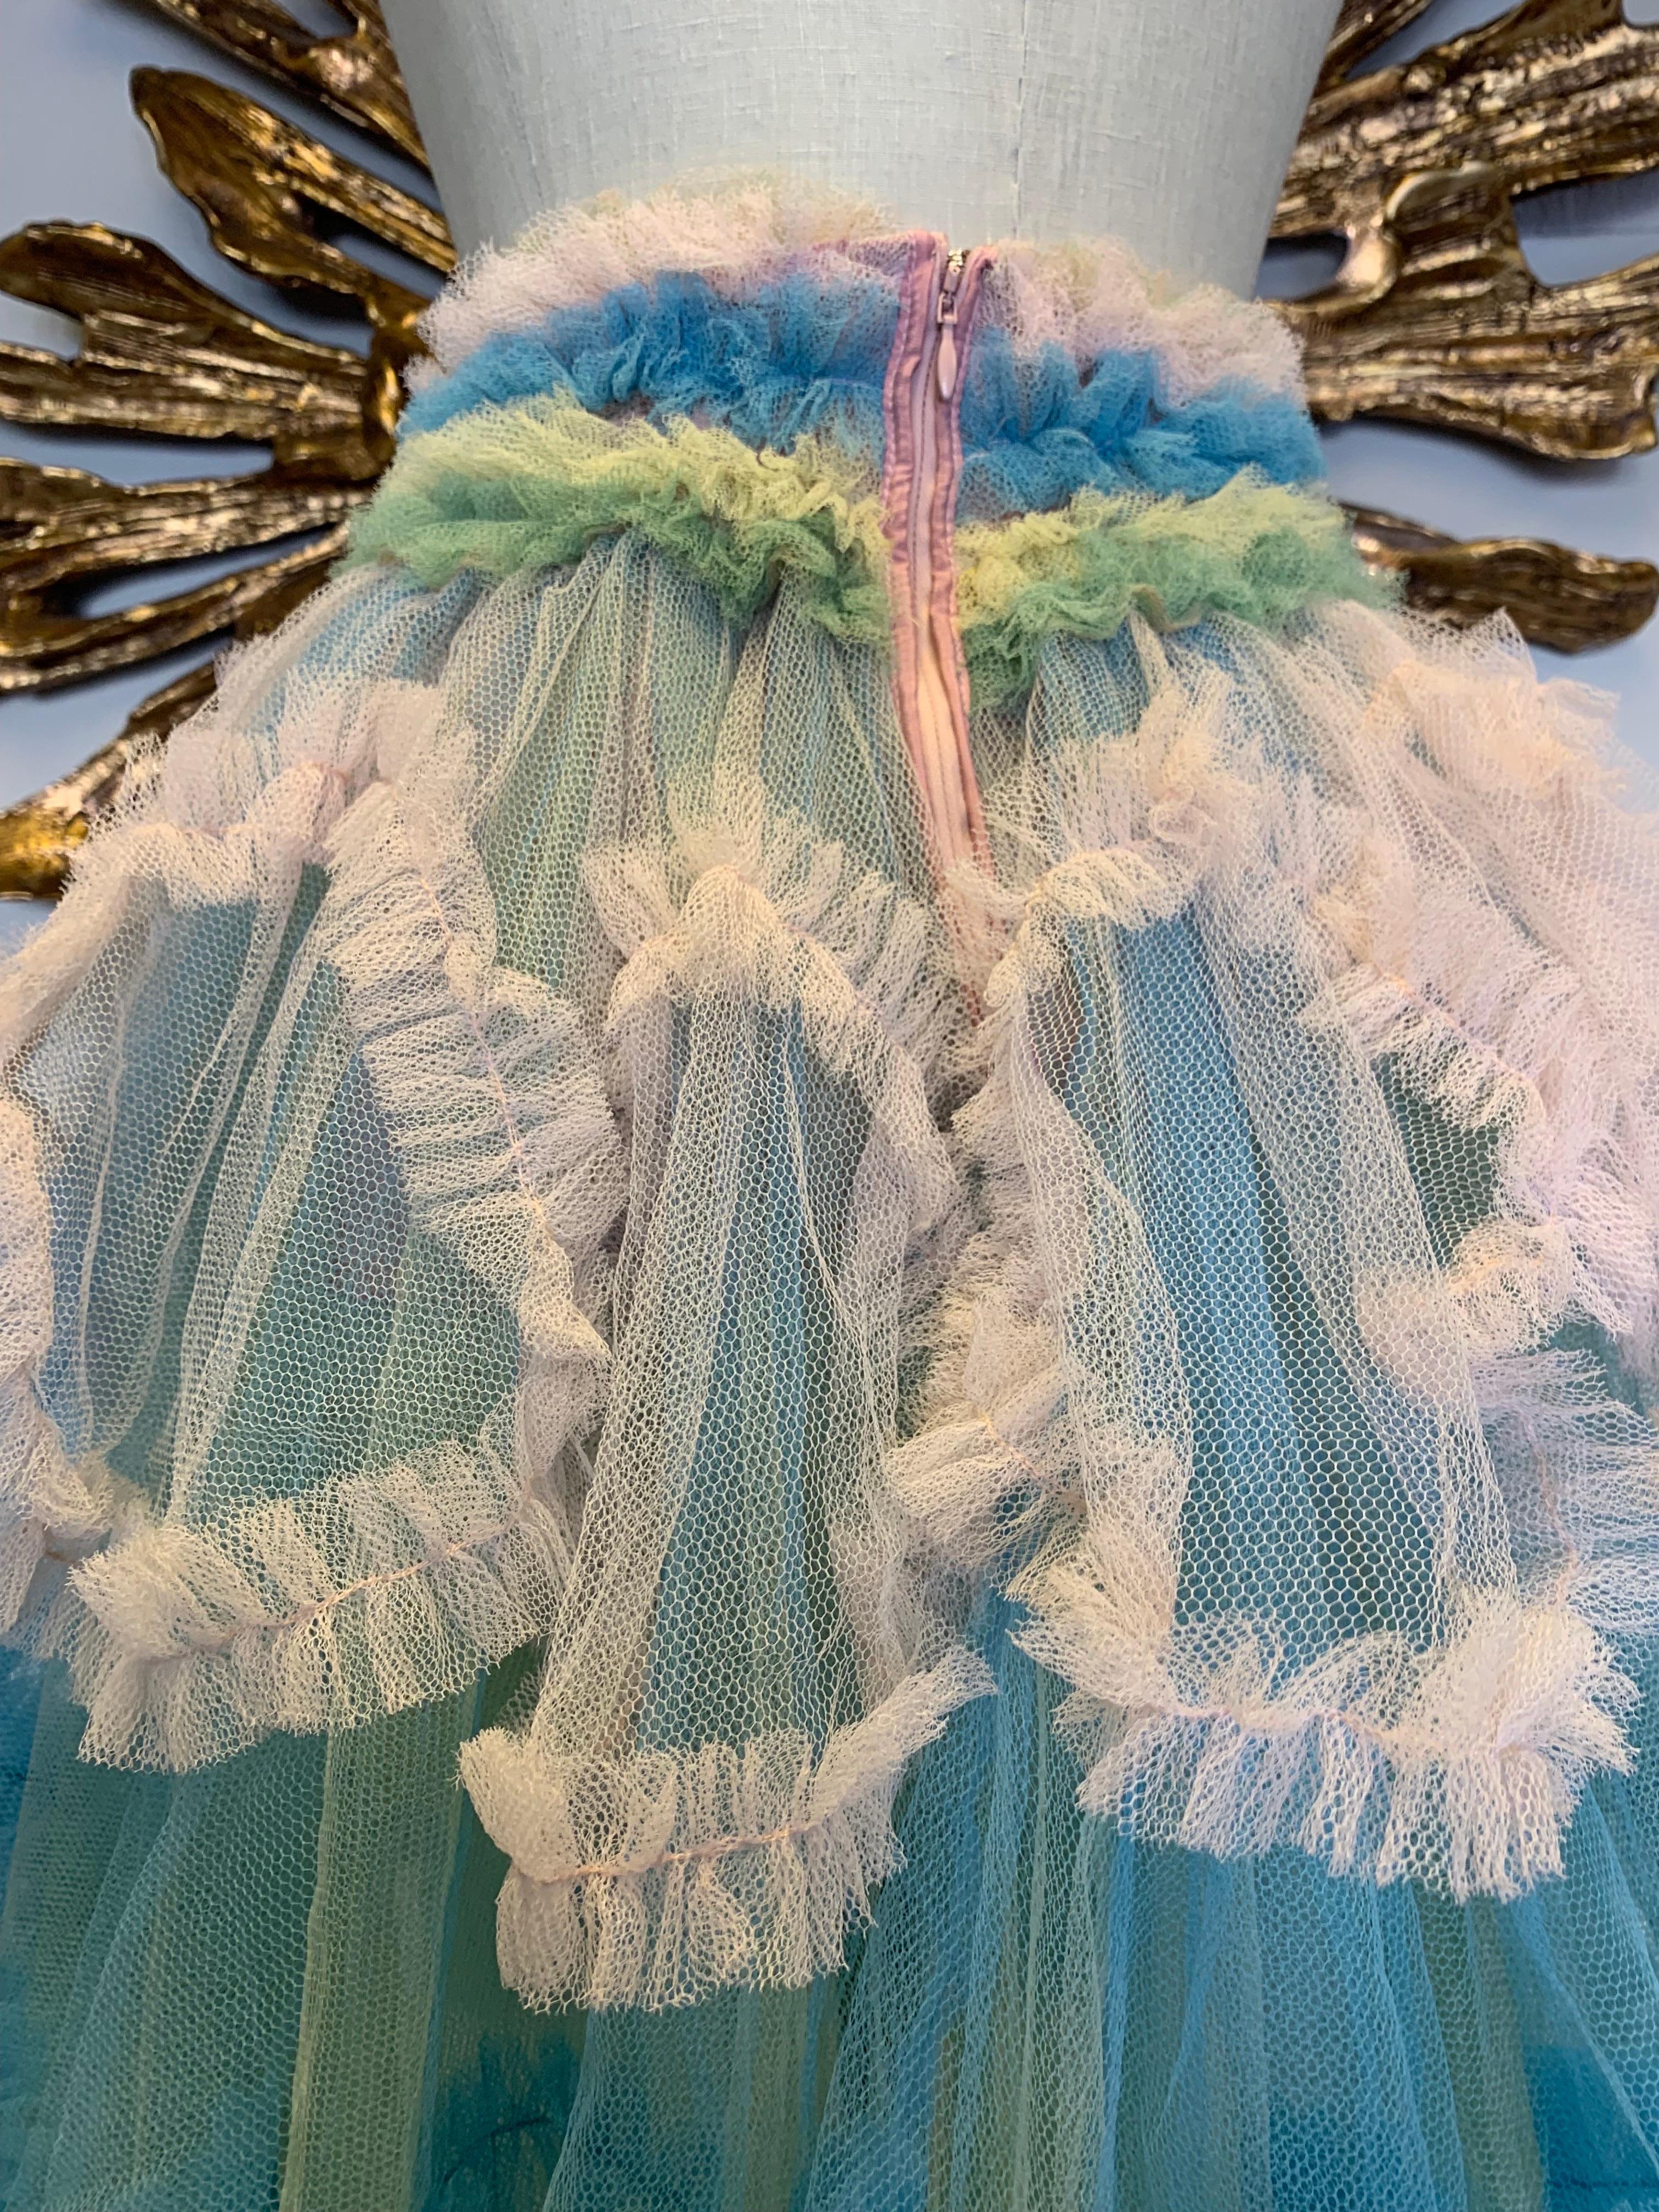 Torso Creations 1950s-Styled Tiered Tulle Ball Skirt w Colorful Ruffles  For Sale 3